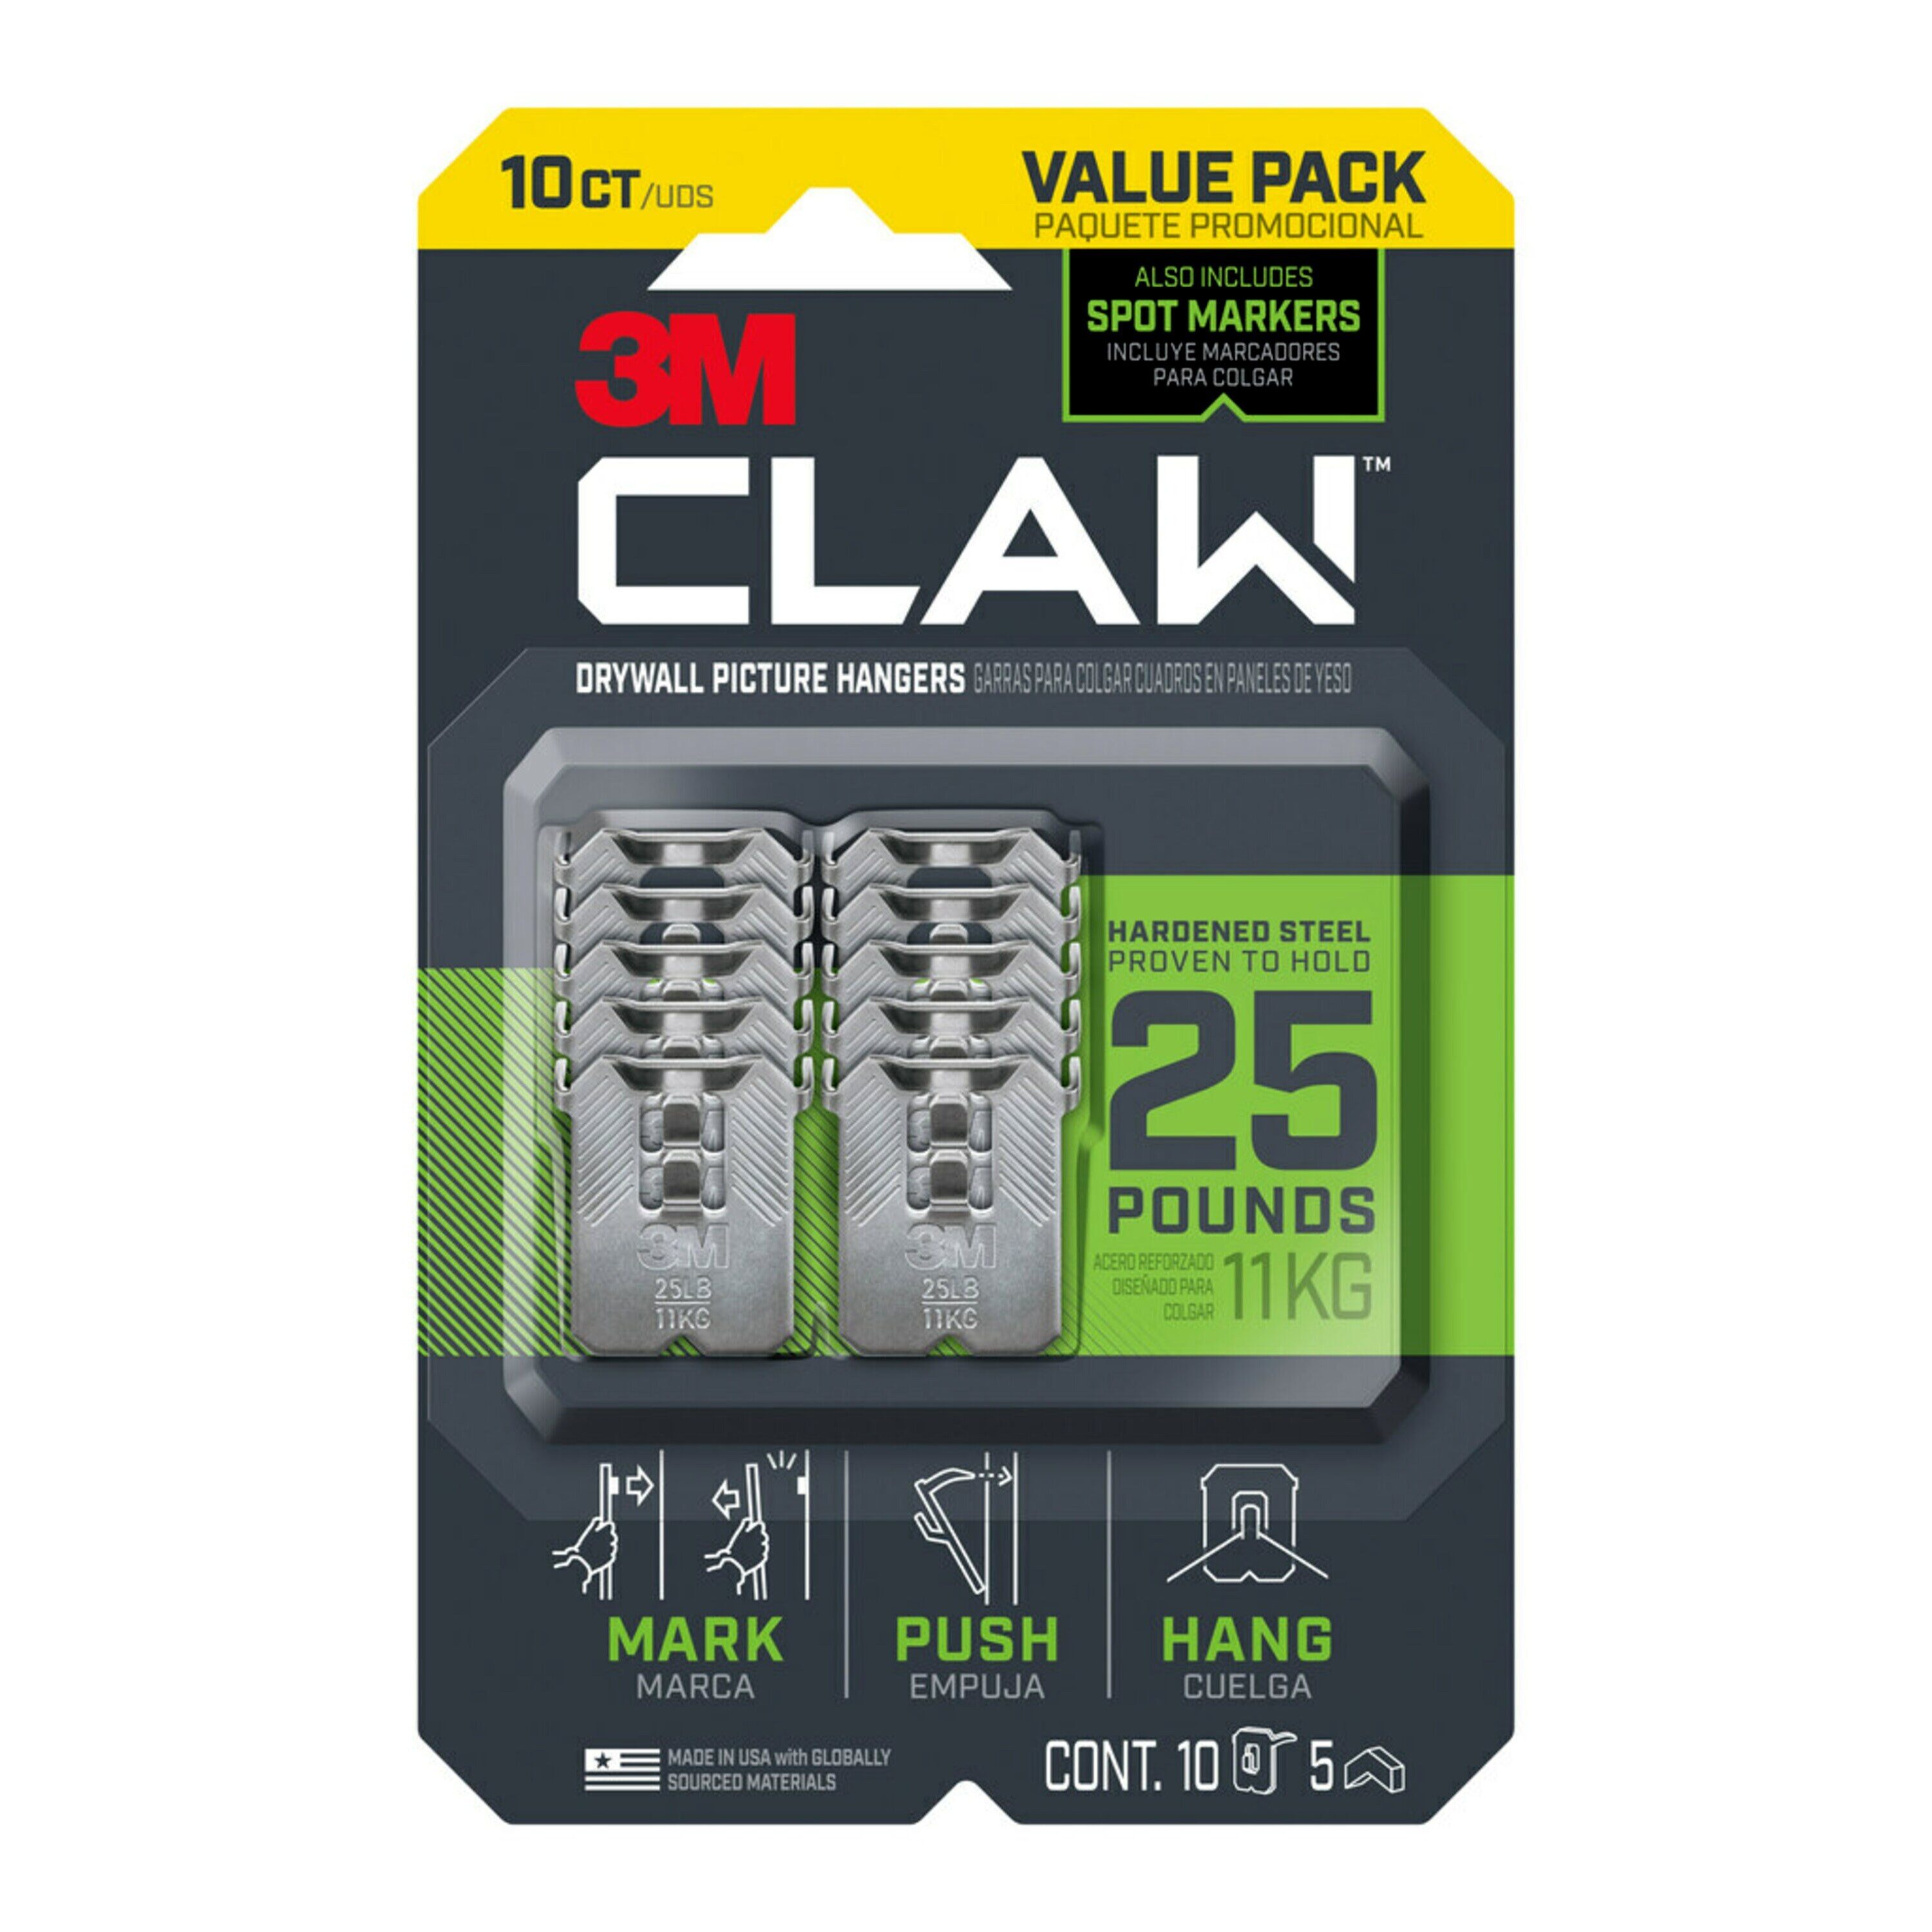 Command 3M Claw Drywall Picture Hangers Holds 25 lb. & Command